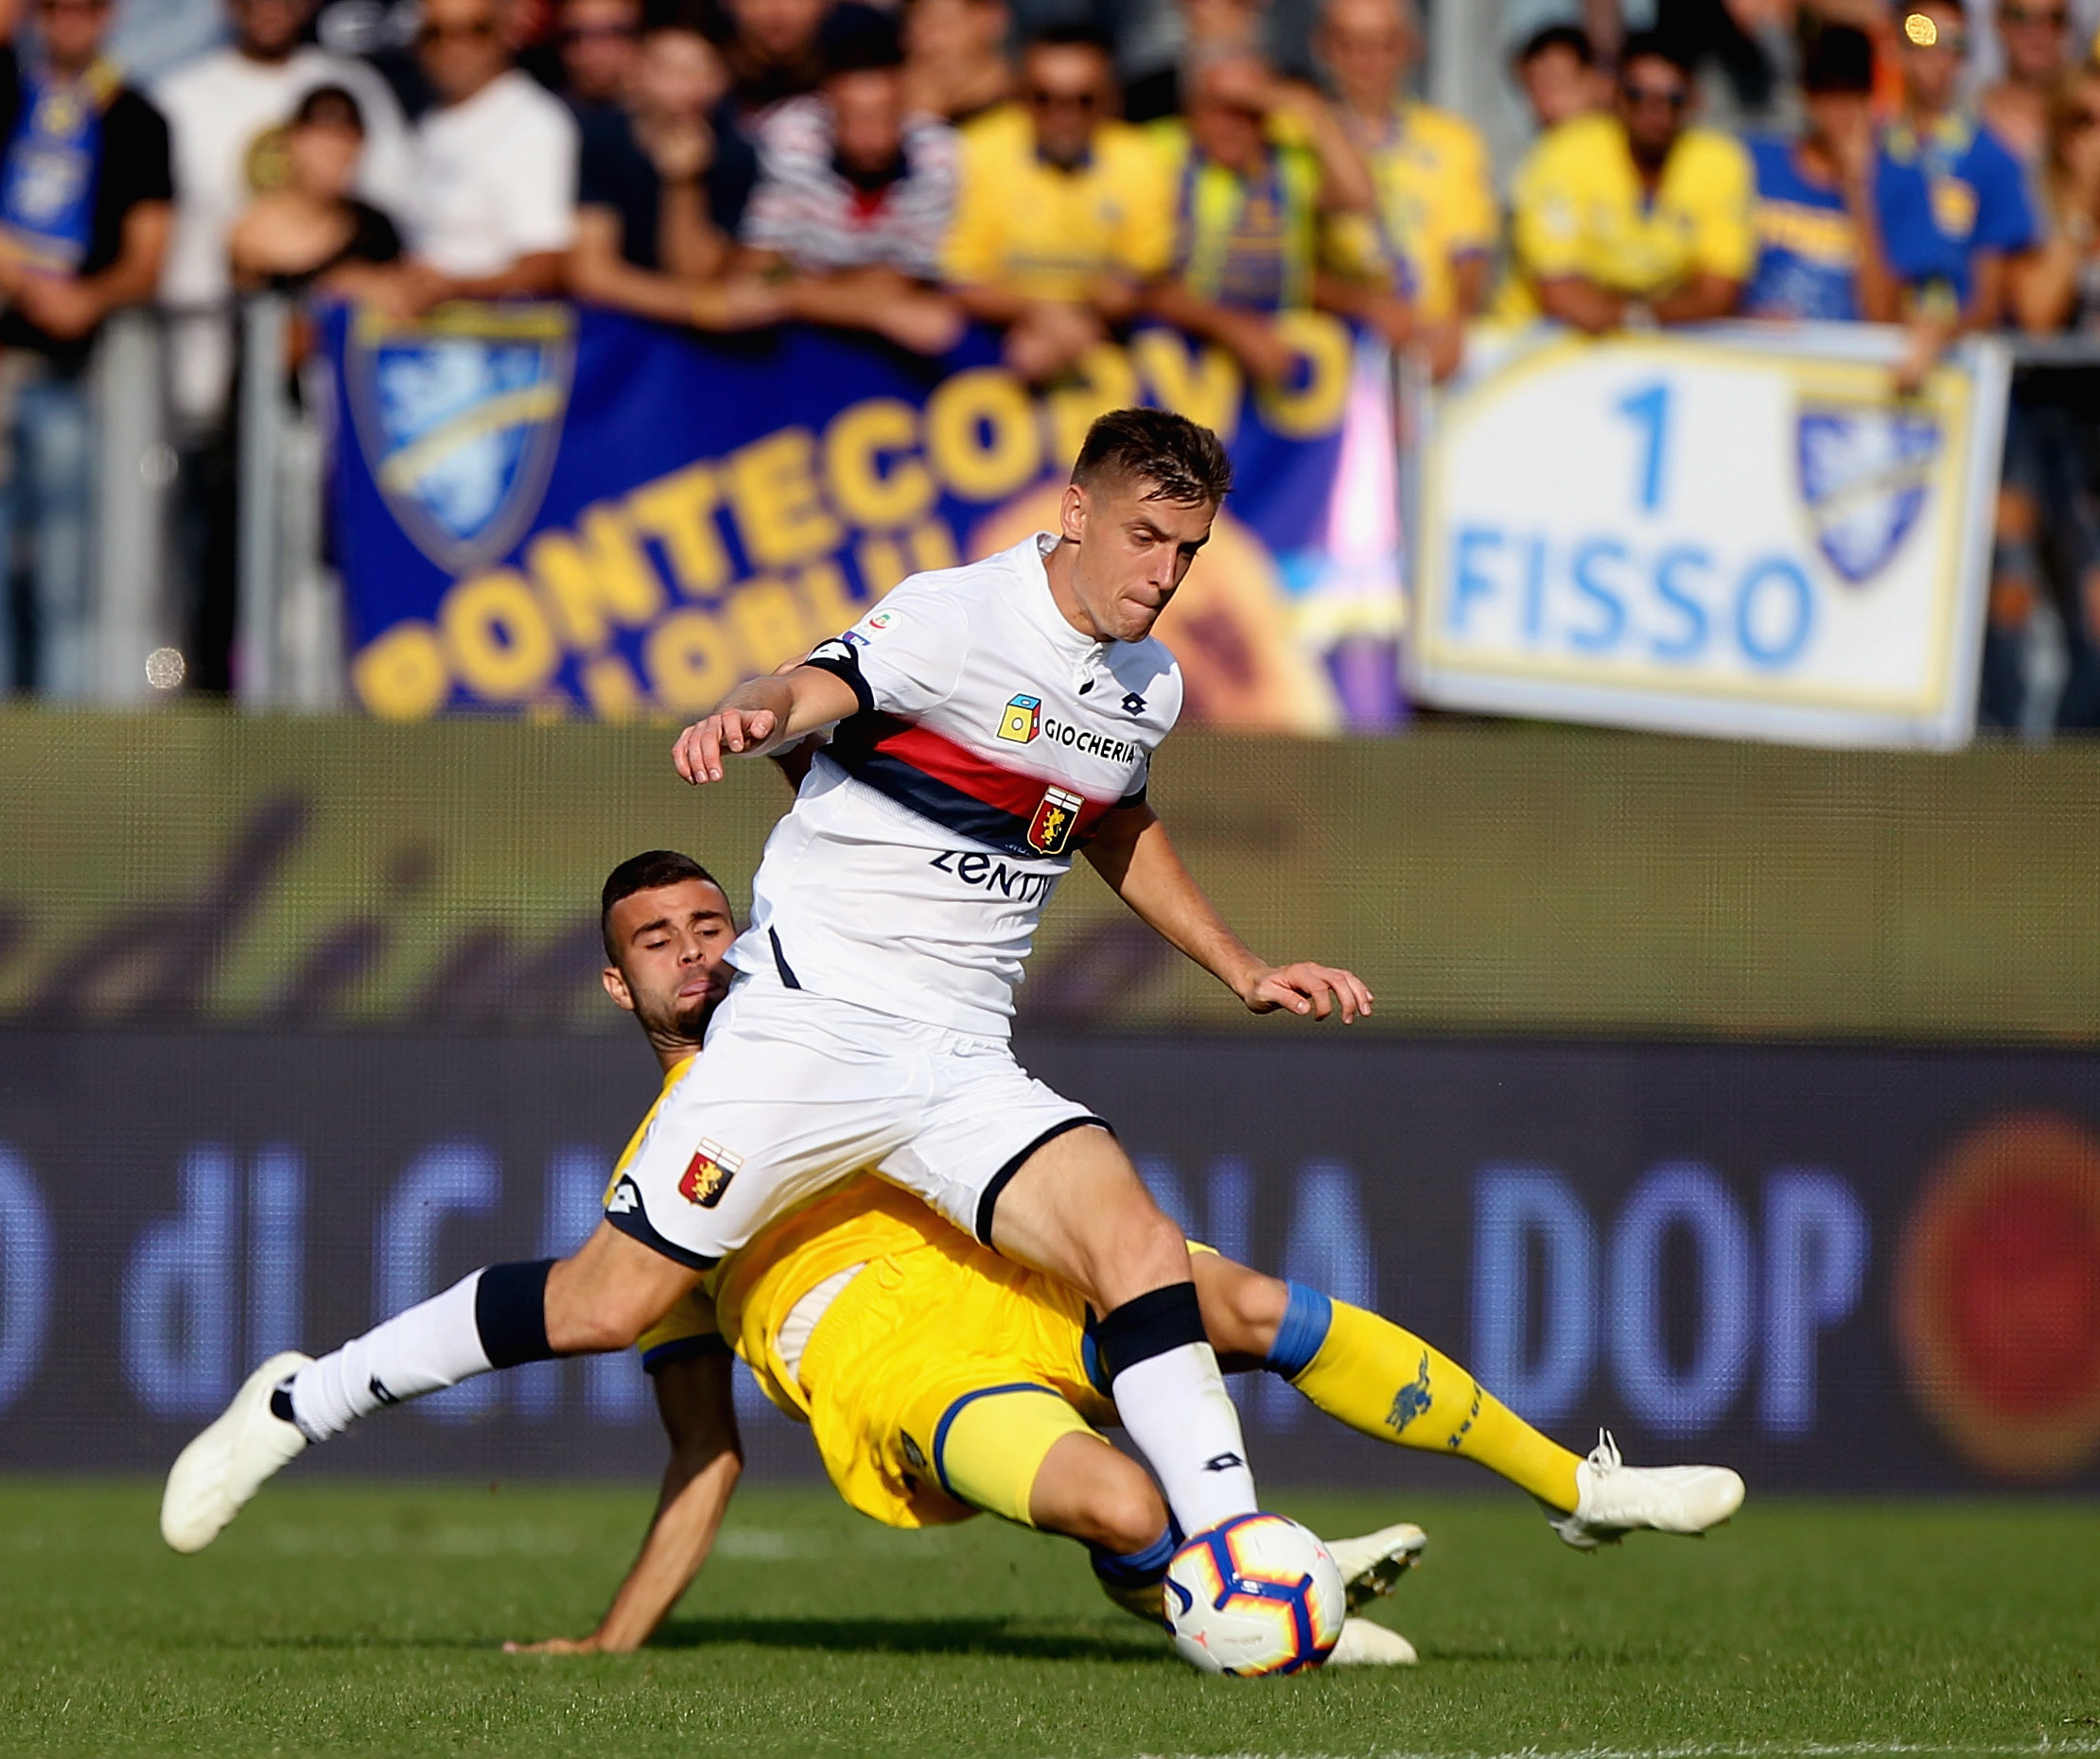 FROSINONE, ITALY - SEPTEMBER 30:  Krzysztof Piatek competes for the ball with Francesco Zampano of Frosinone Calcio during the Serie A match between Frosinone Calcio and Genoa CFC at Stadio Benito Stirpe on September 30, 2018 in Frosinone, Italy.  (Photo by Paolo Bruno/Getty Images)